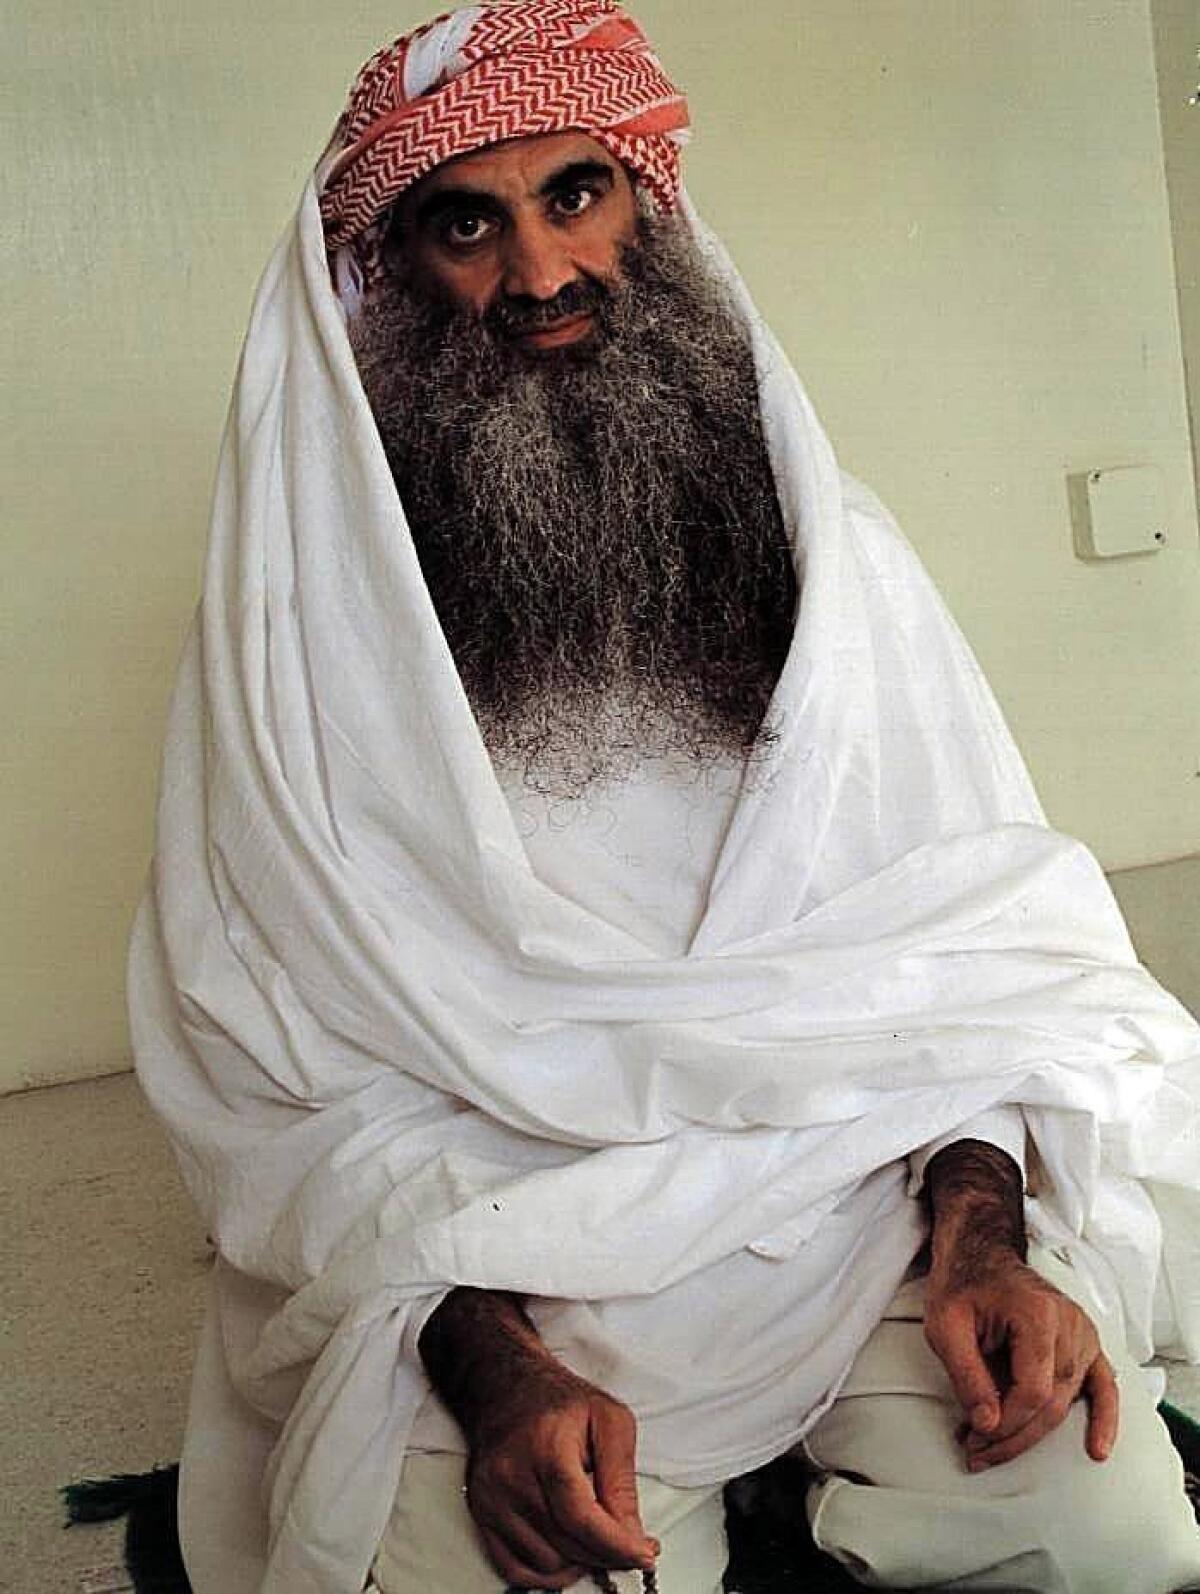 This photo of alleged Khalid Sheik Mohammed, in detention at Guantanamo, is the first known public picture since his widely circulated March 2003 capture photo of him rousted from sleep in Rawalpindi, Pakistan.